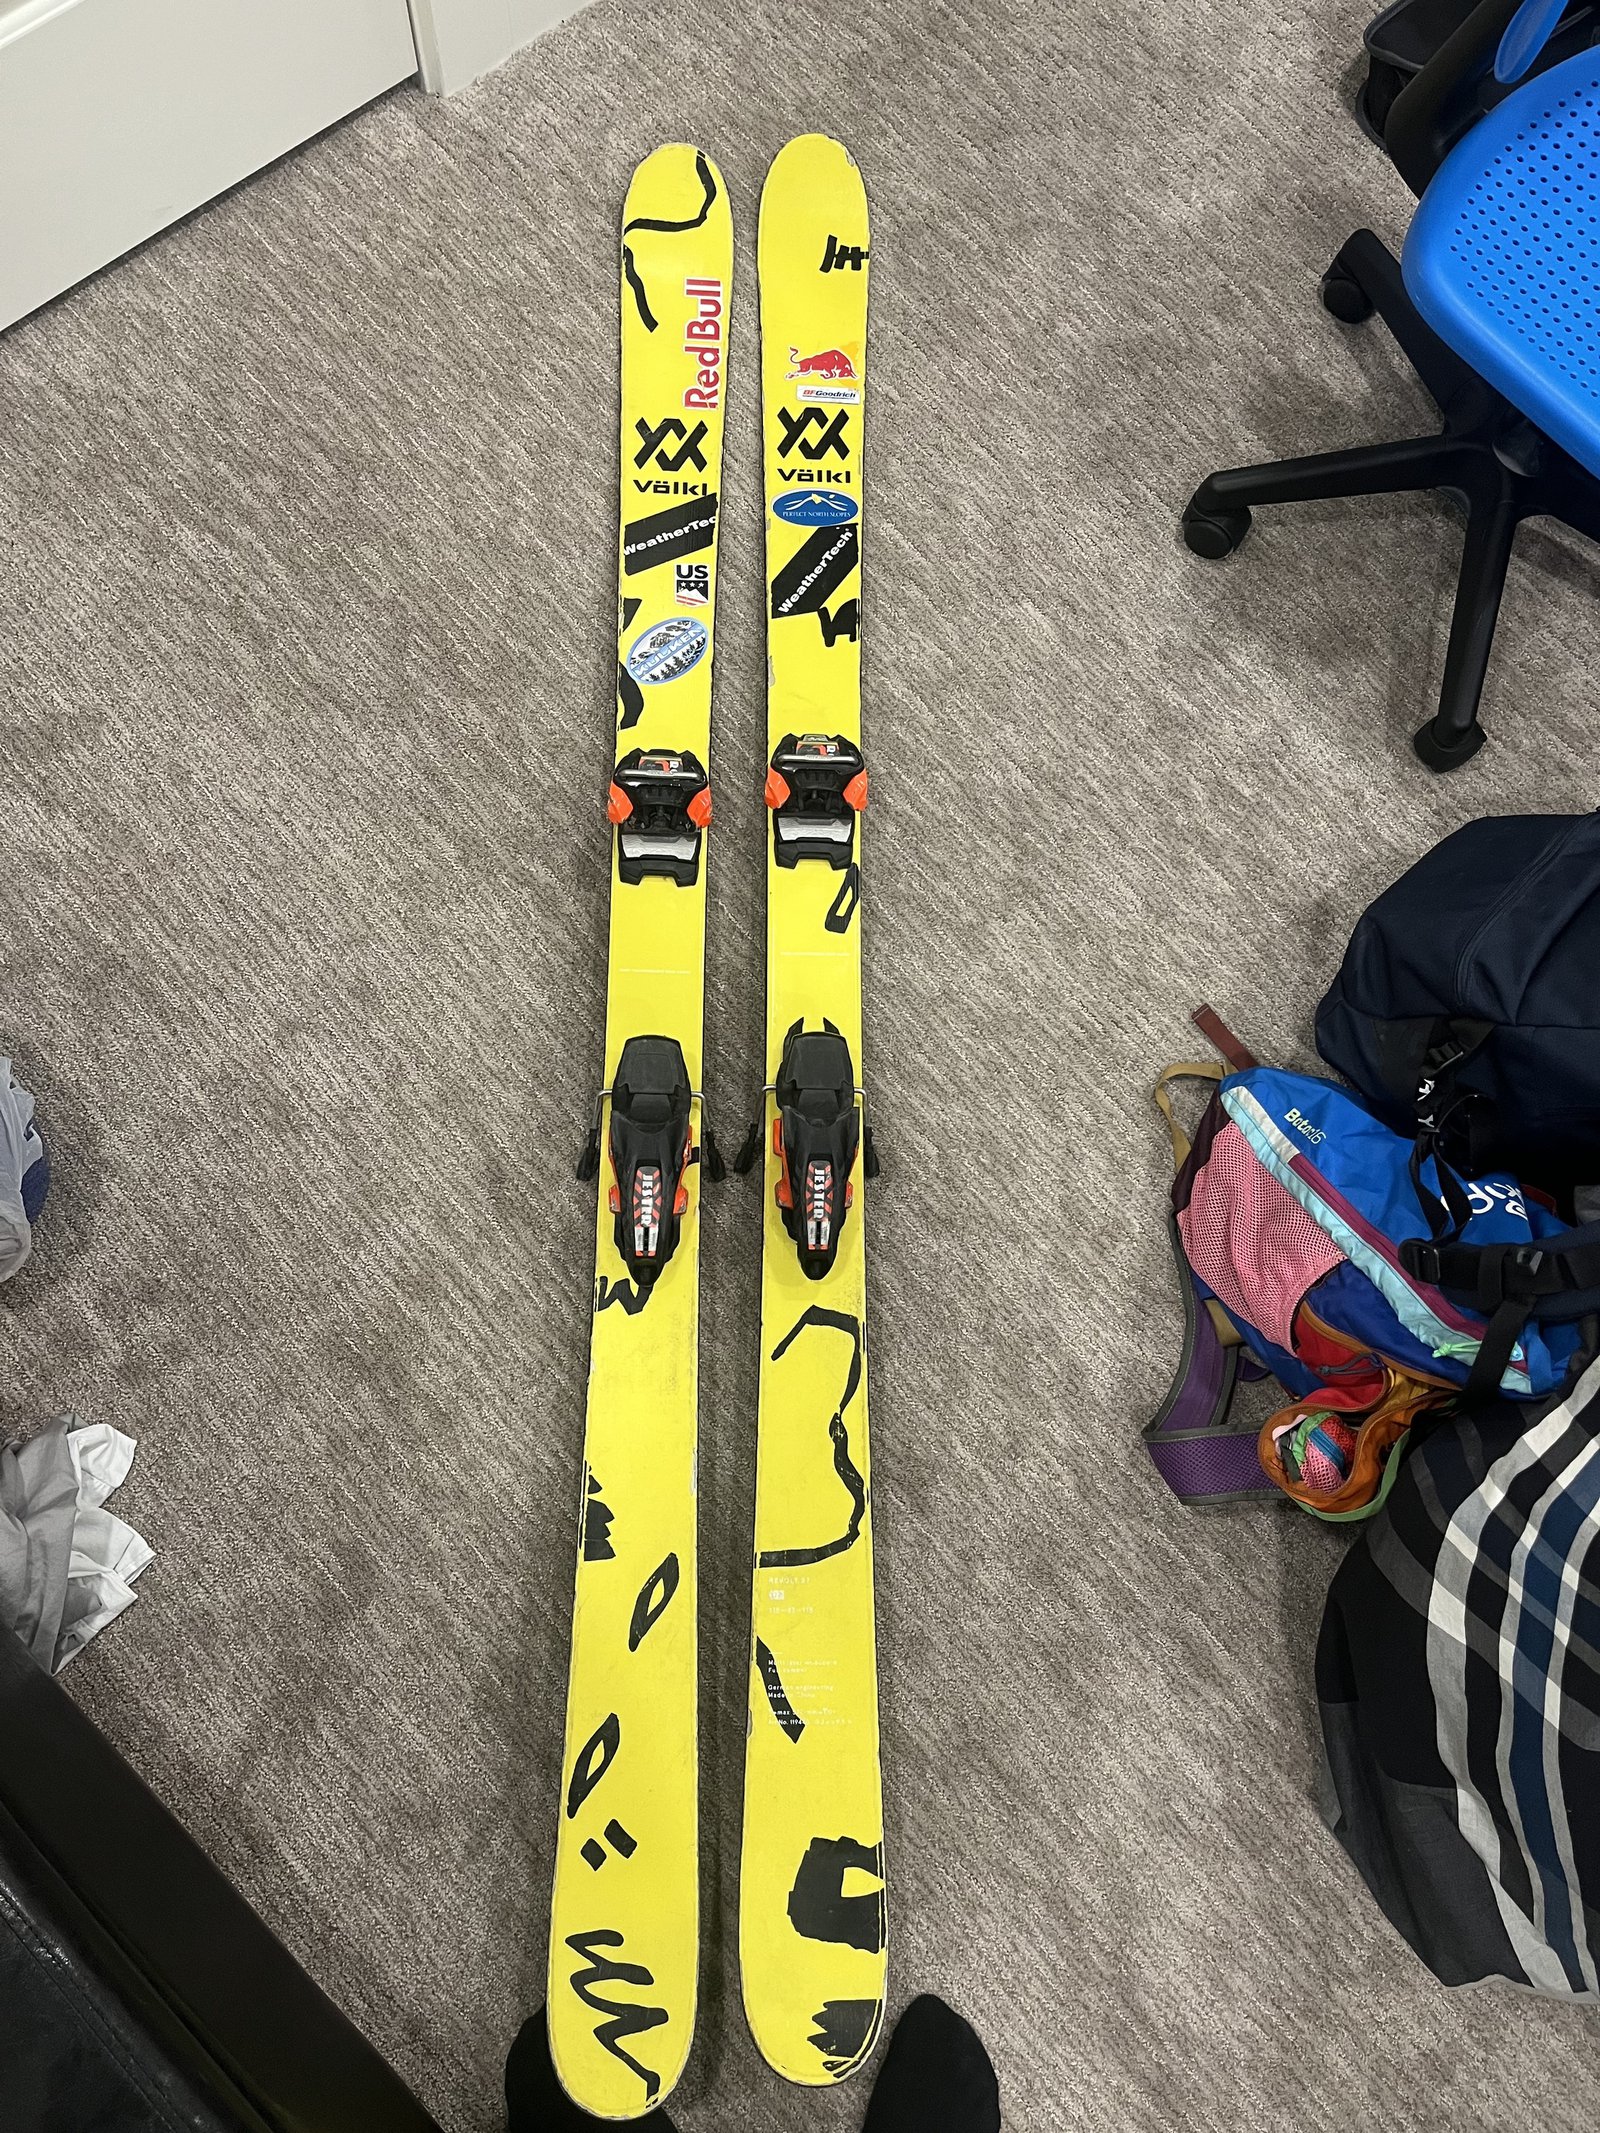 Nick goeppers skis